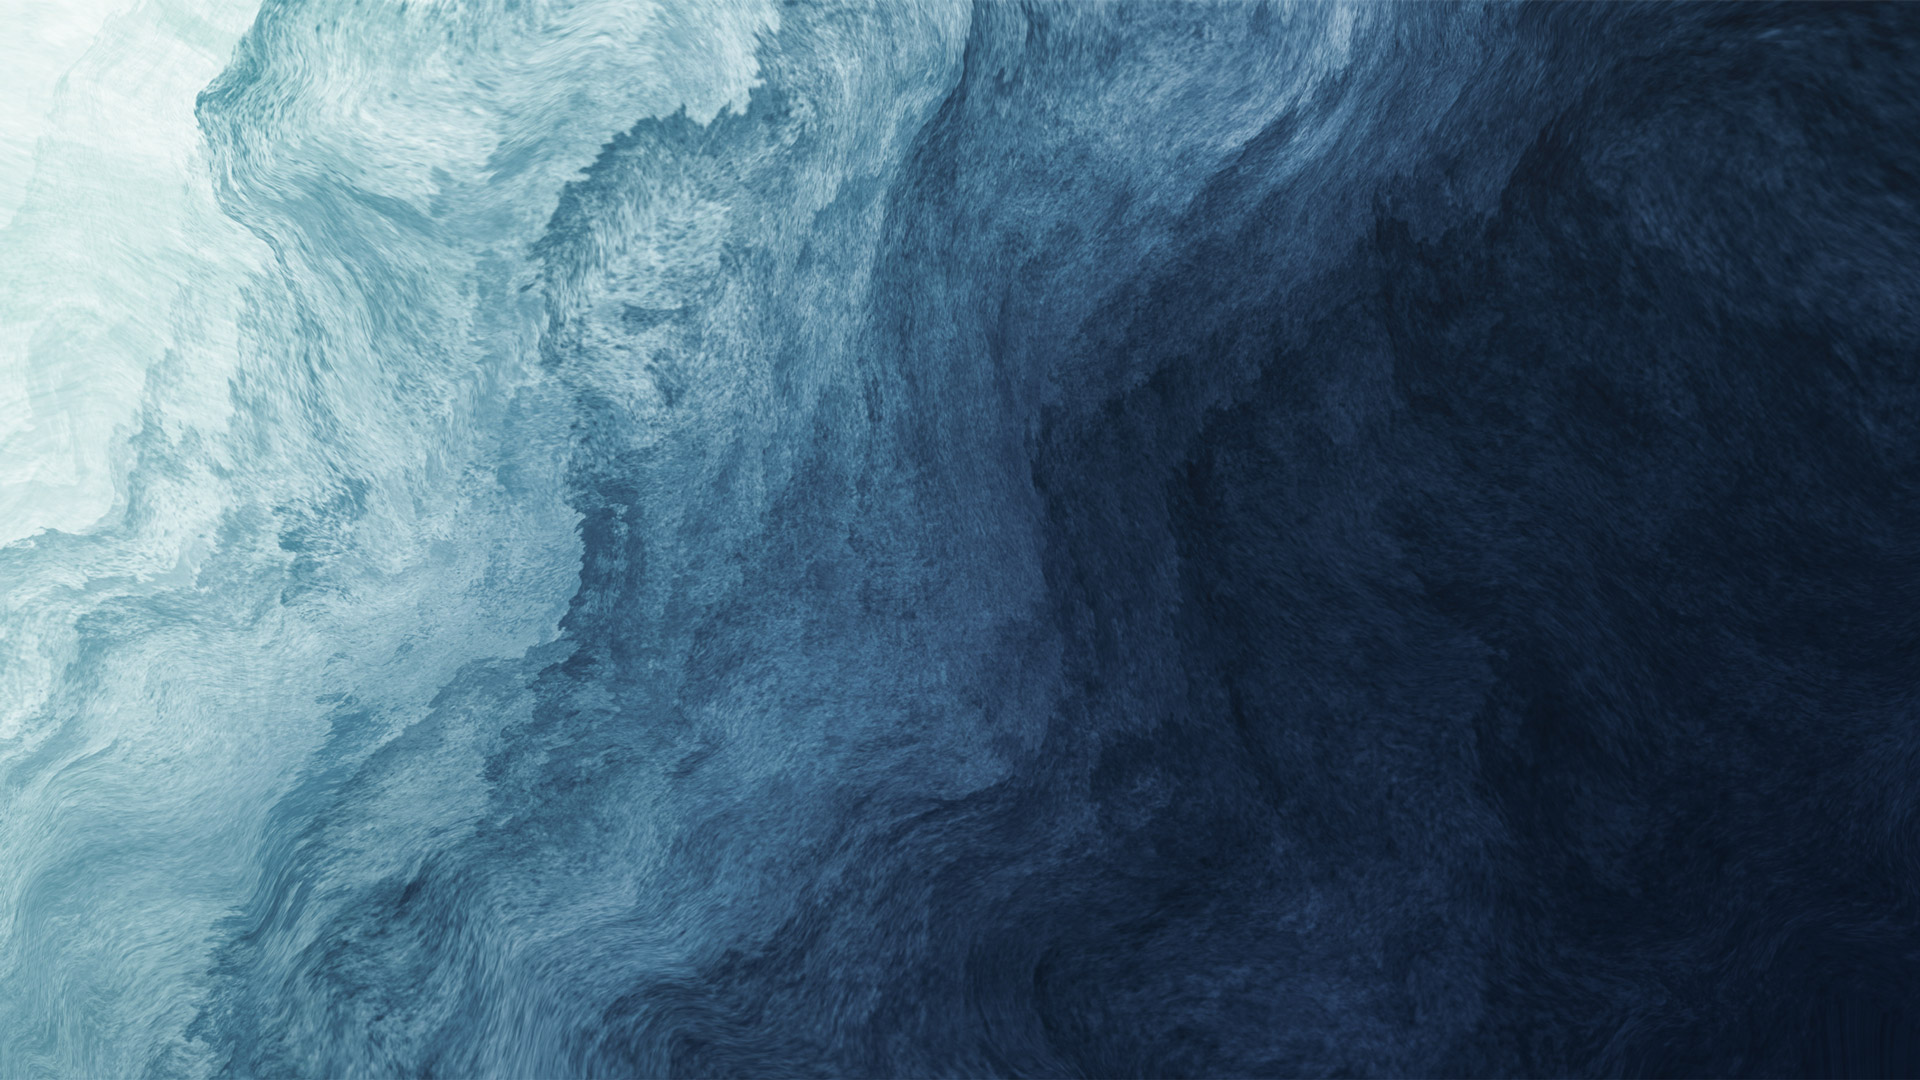 Abstract Ocean Image